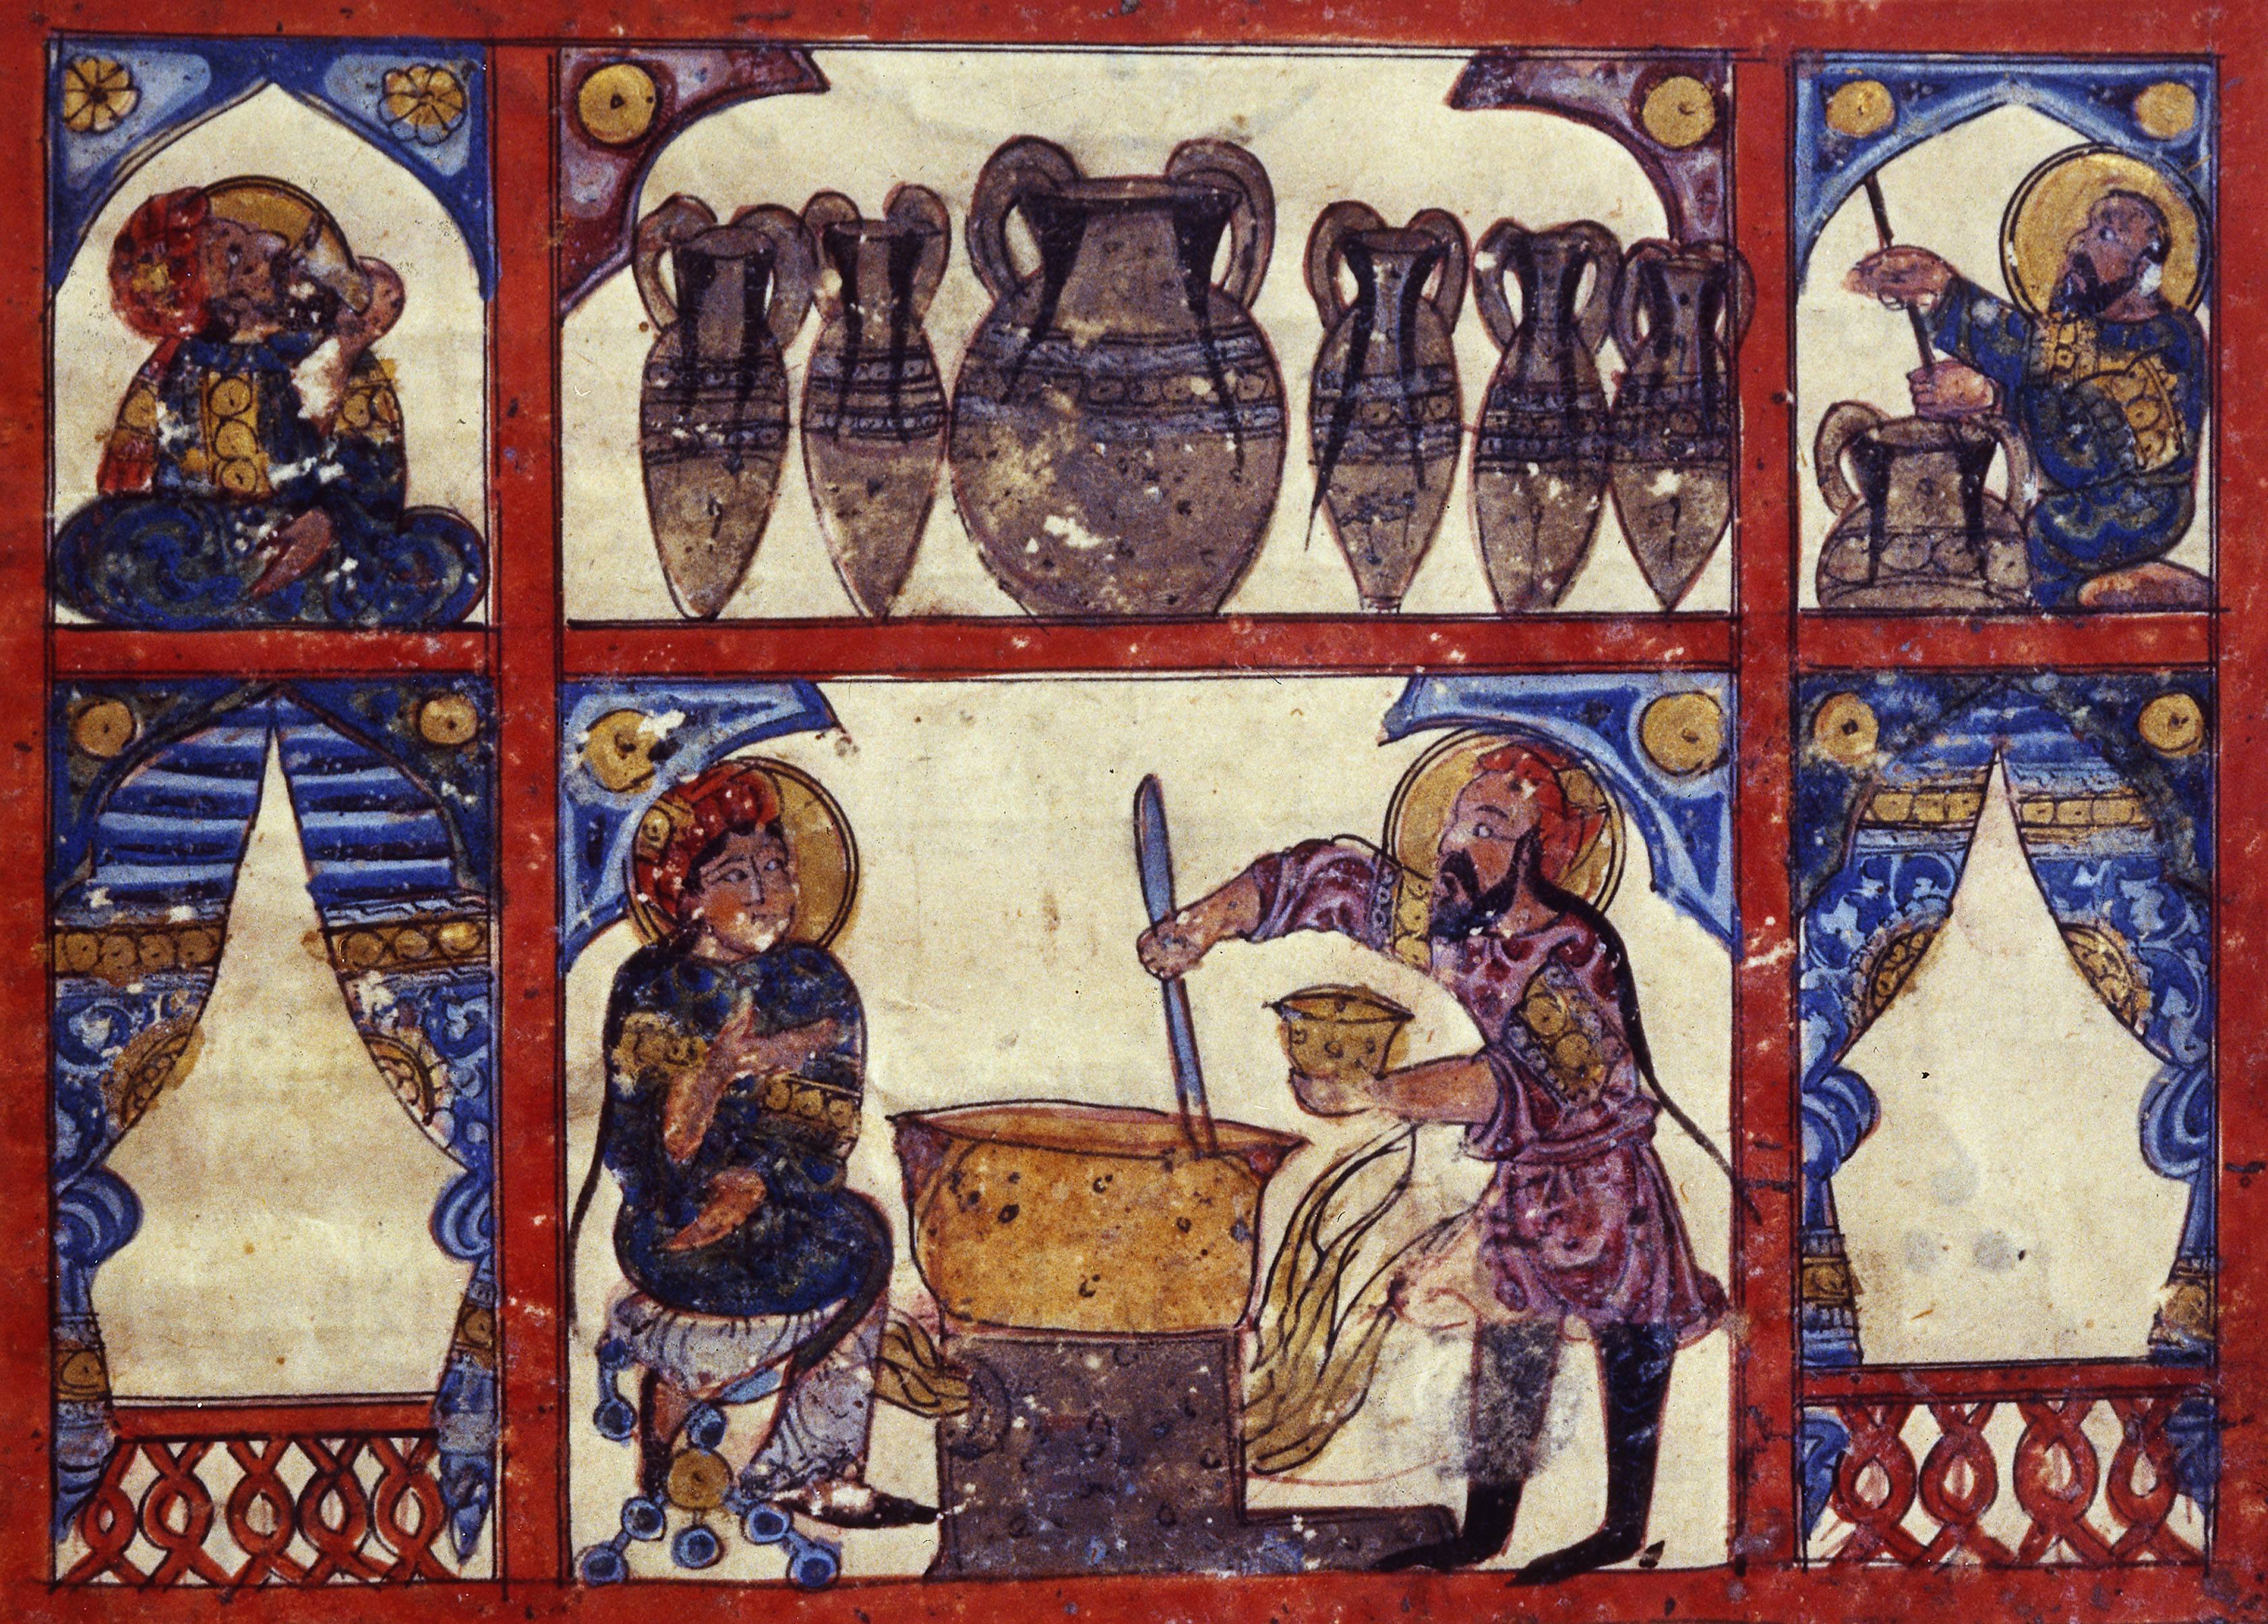 Pharmacy: Pharmacist. An apothecary preparing medicine. Miniature, Persia, 13th century. From an Arabic translation of the Materia medica of Dioscorides. New York, Metropolitan Museum of Art (photo: akg-images / Werner Forman/picture alliance)